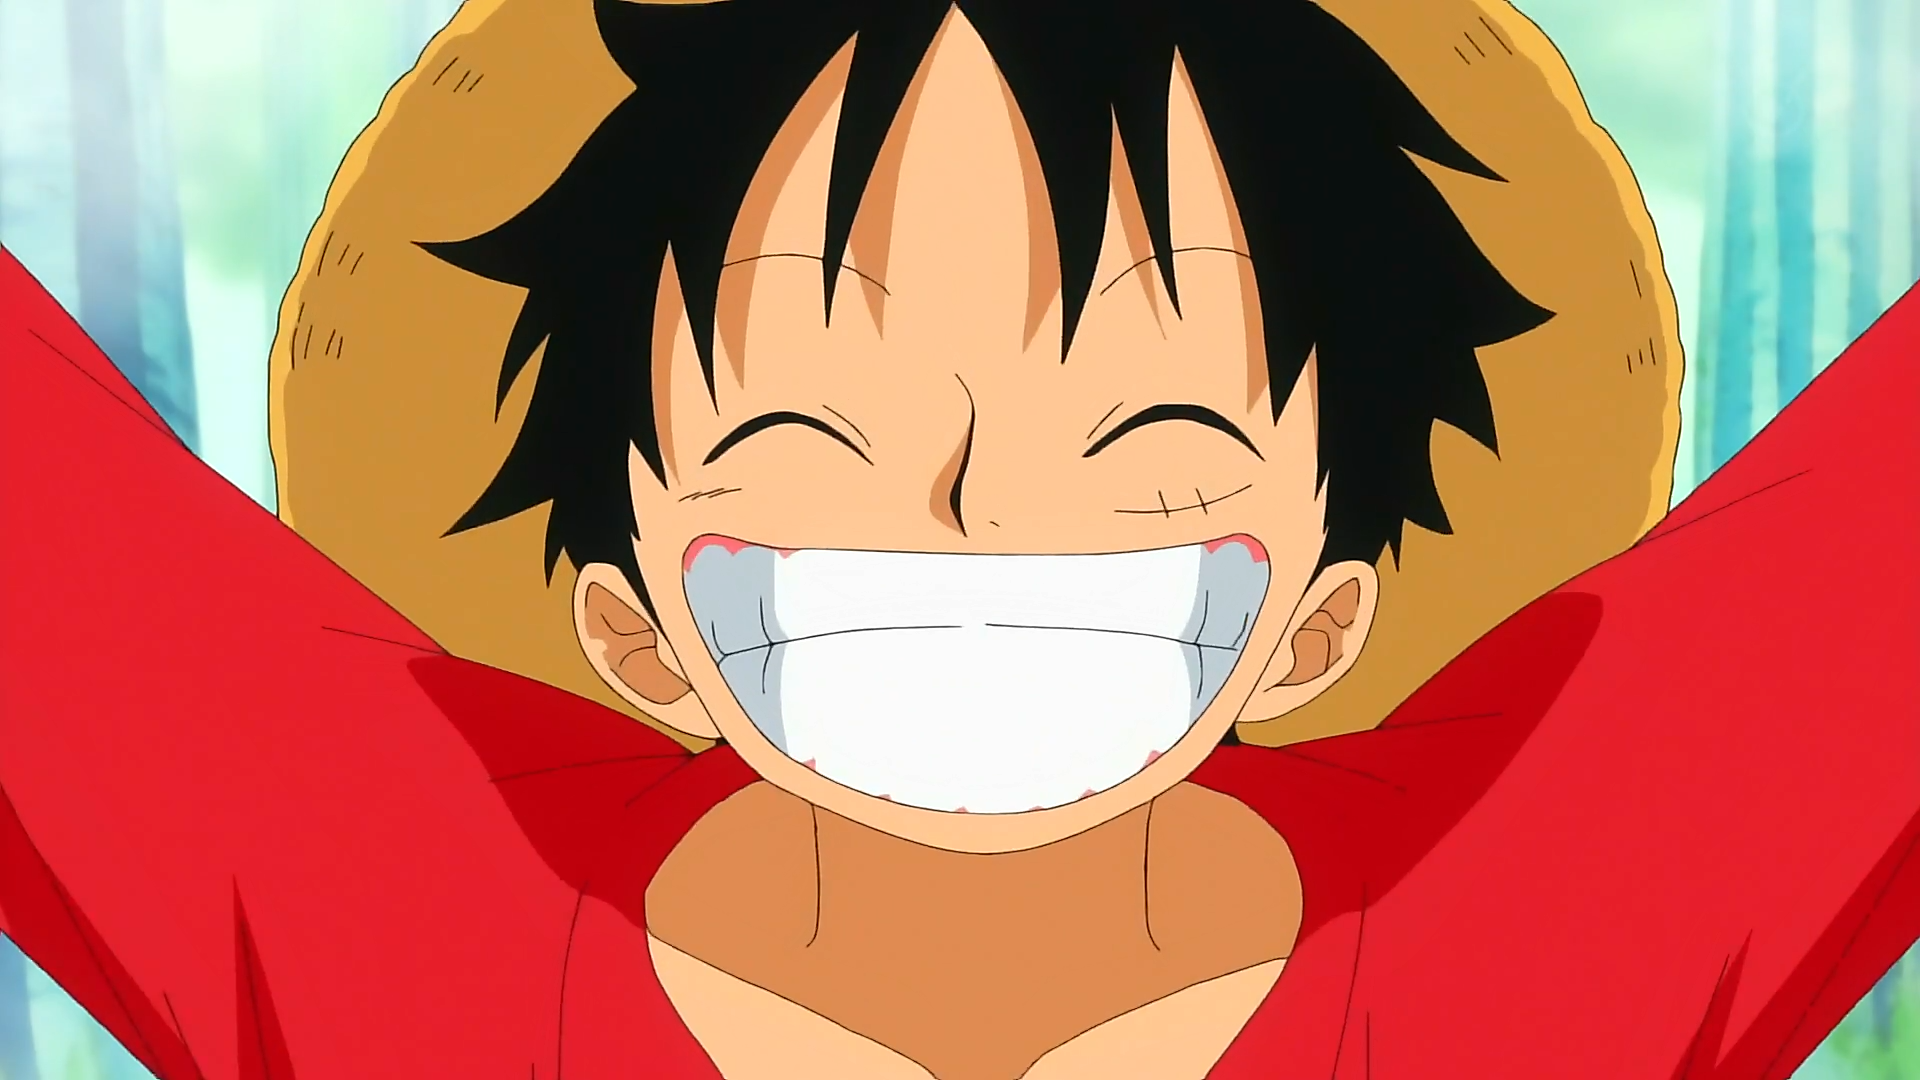 One Piece Luffy Smile wallpaper   698325 1920x1080